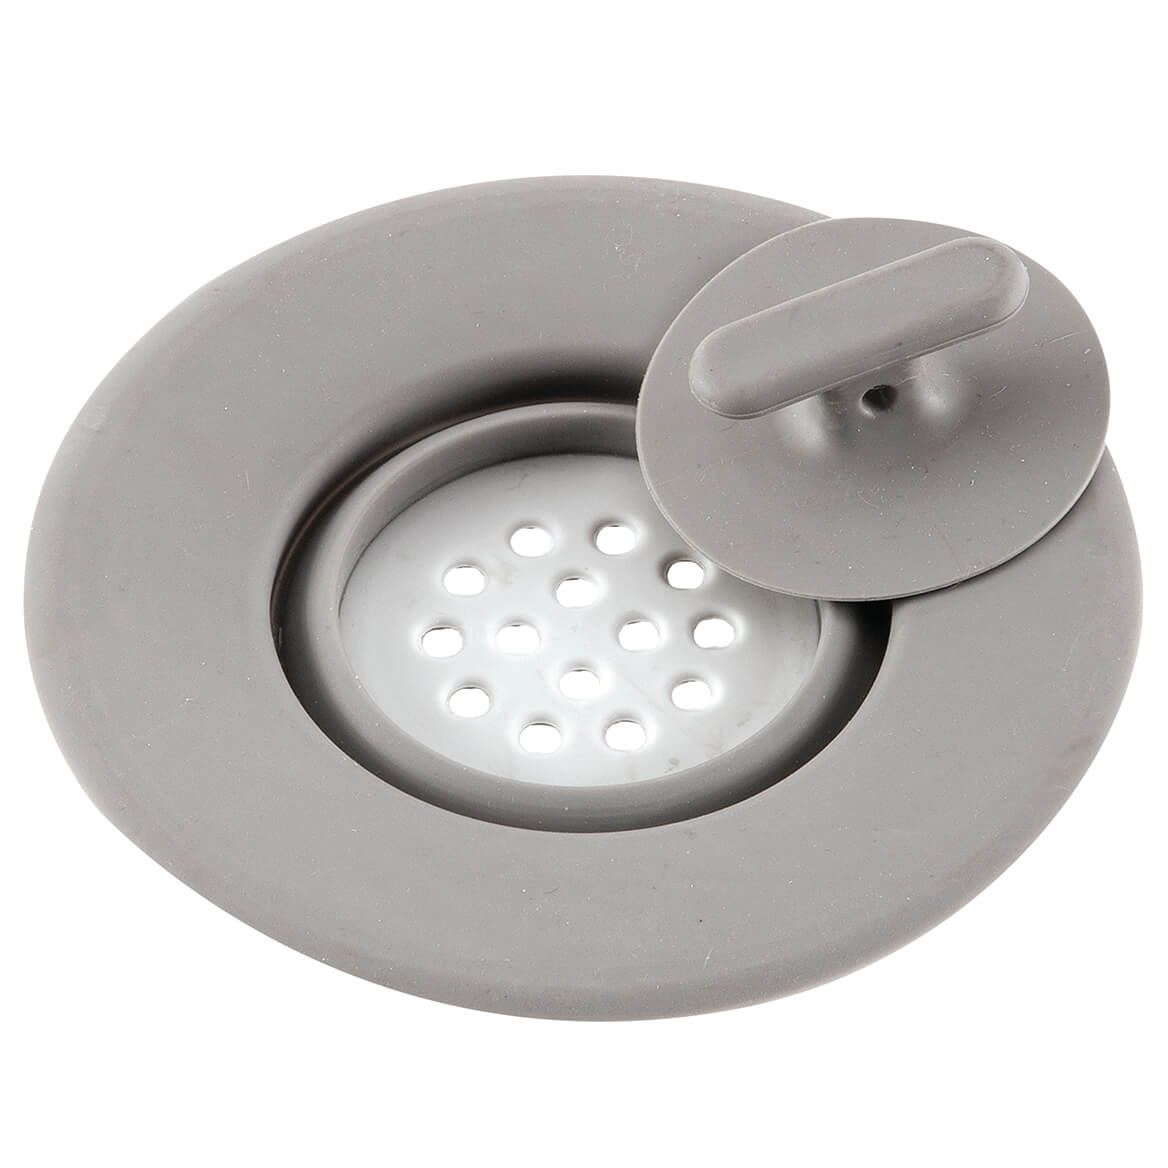 Sink Strainer with Stopper by Chef's Pride™ + '-' + 376854